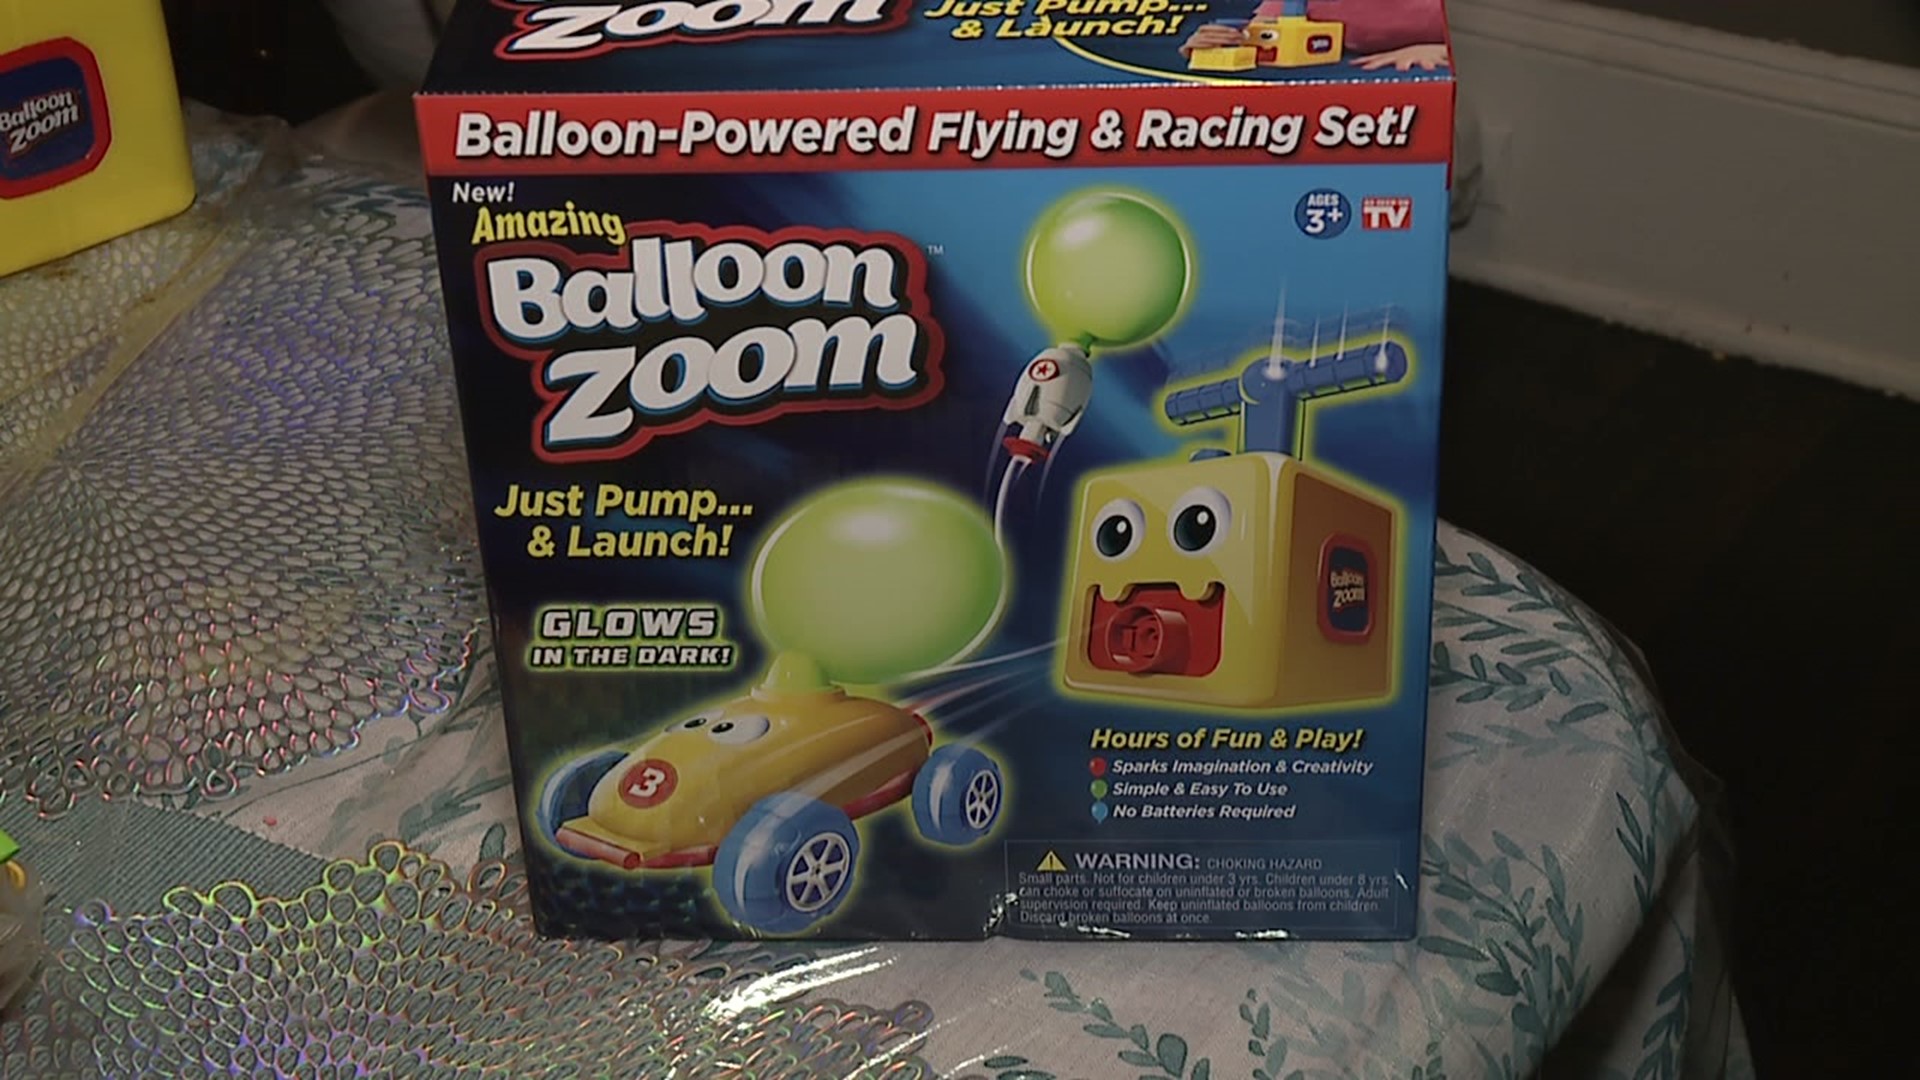 The maker claims Balloon Zoom is an amazing, balloon-powered flying and racing toy set.